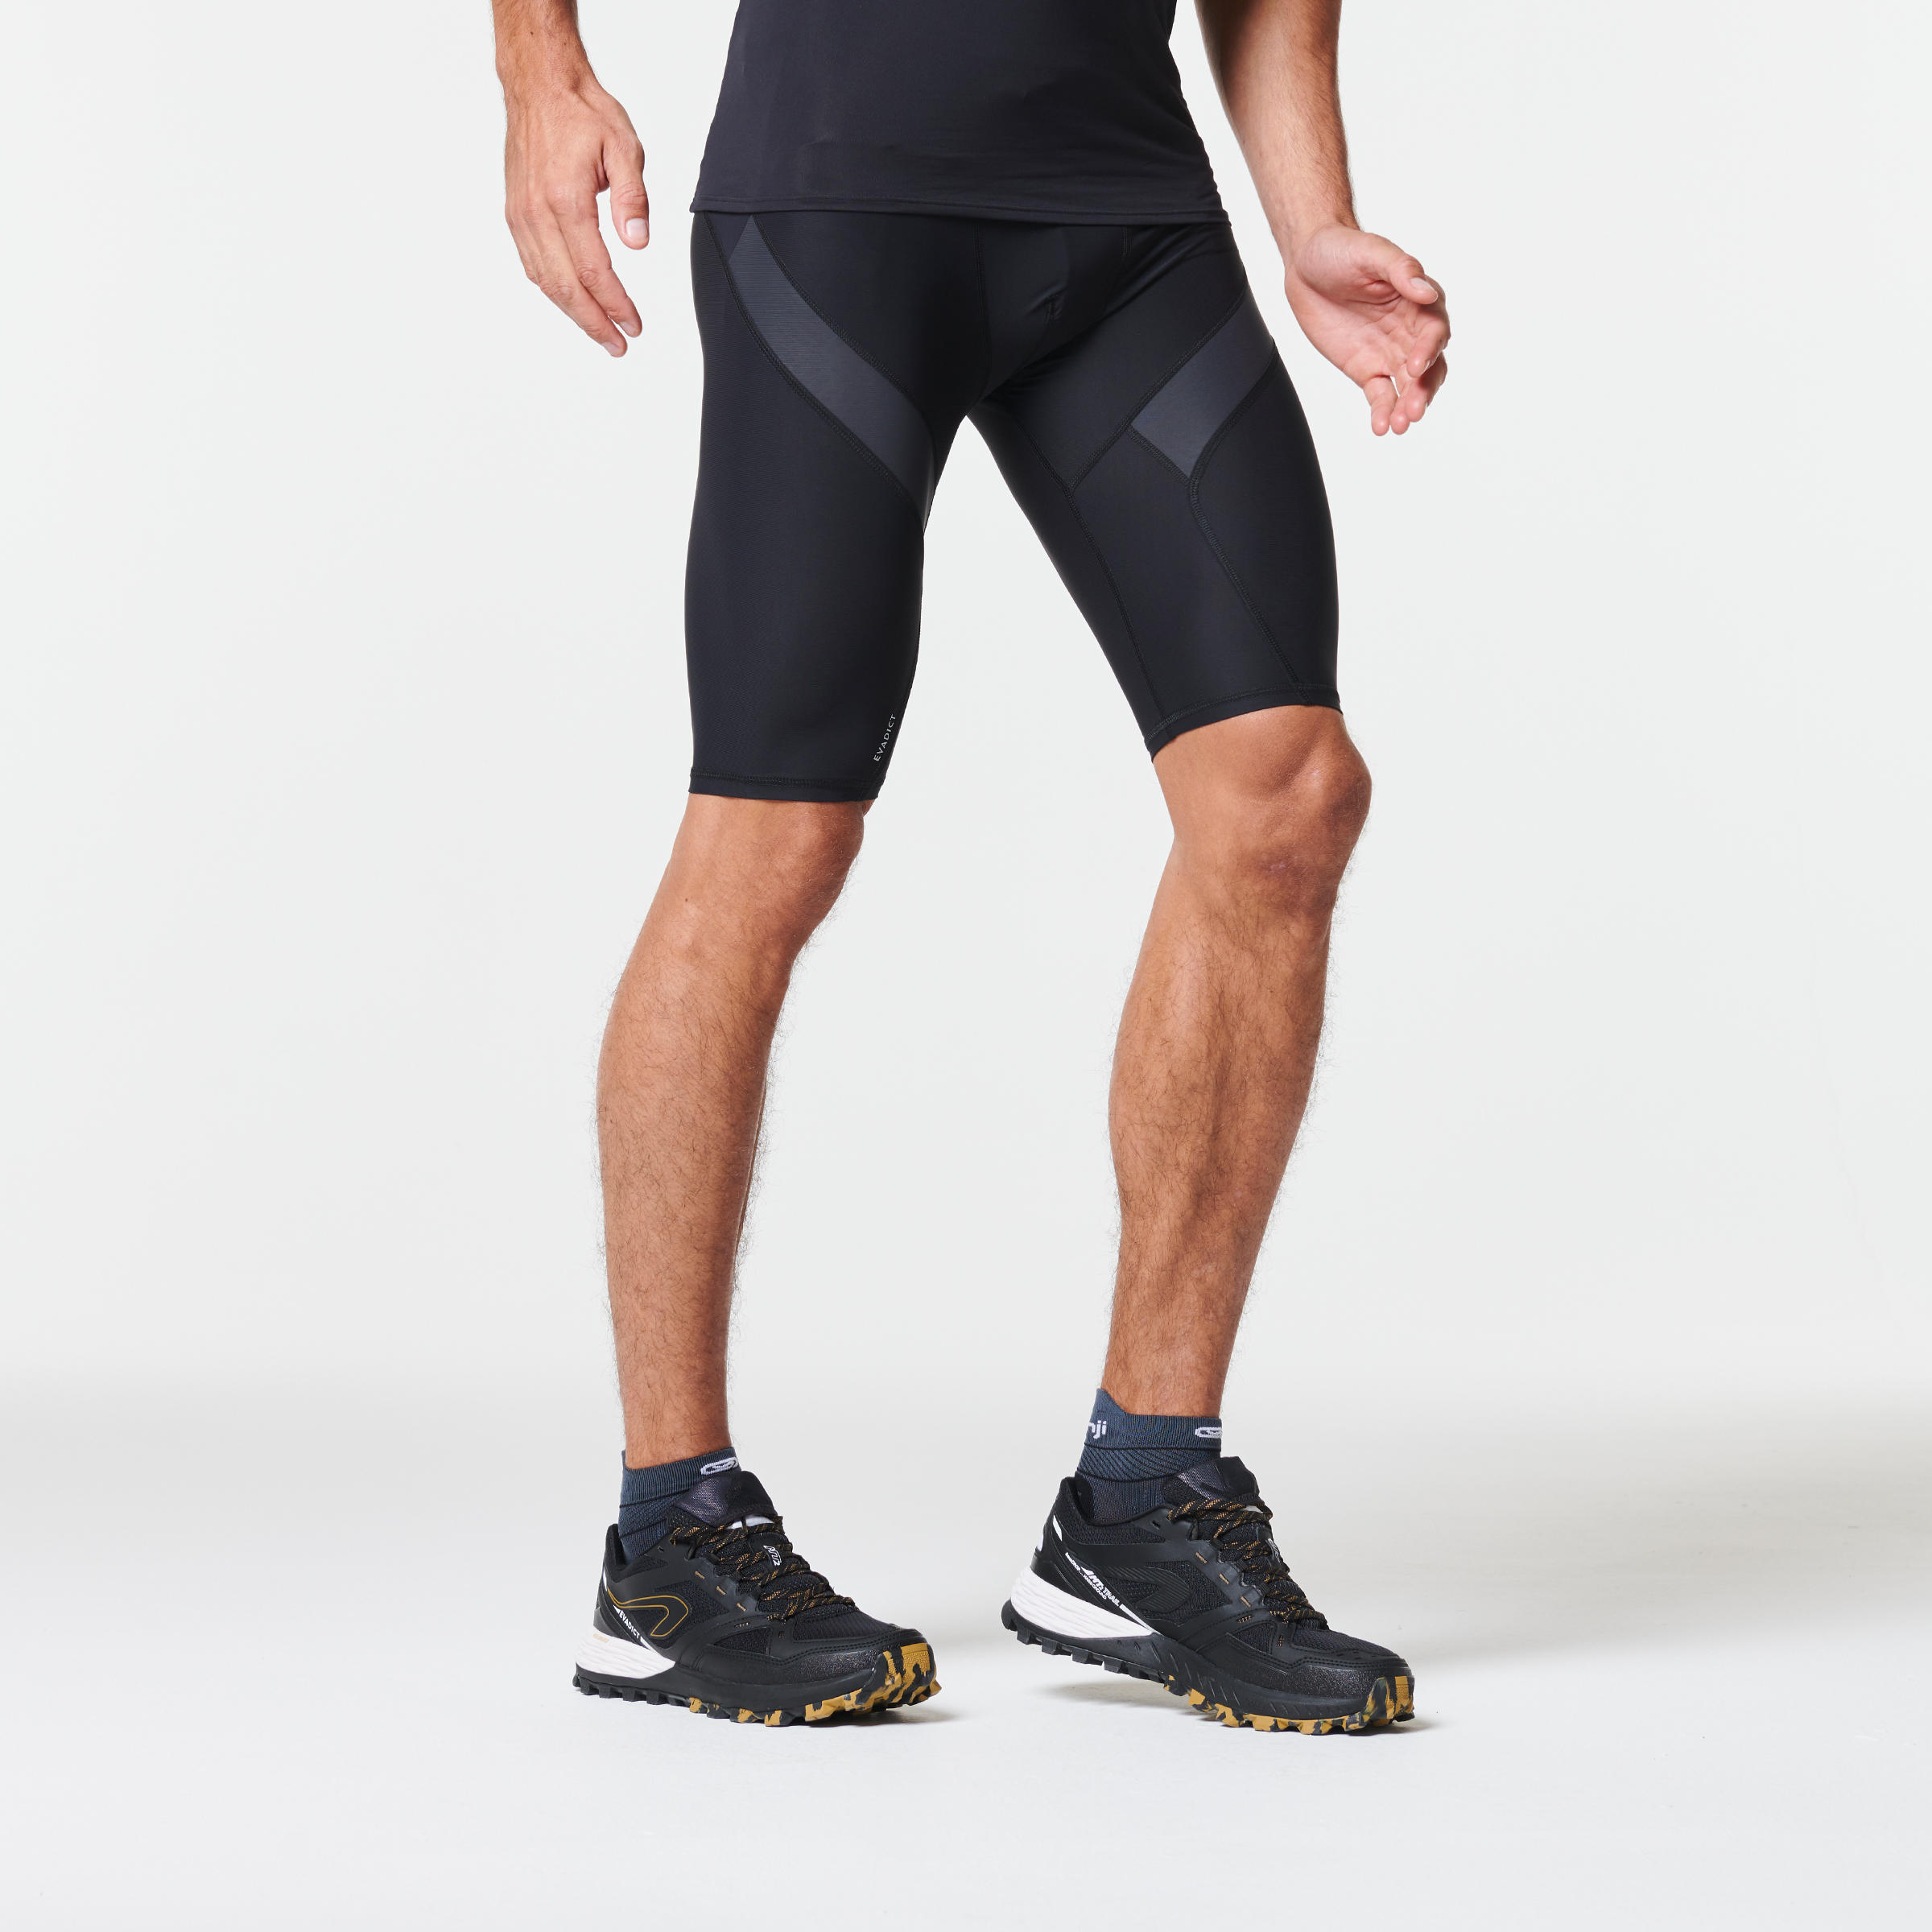 Trail Running Tight Compression Shorts 